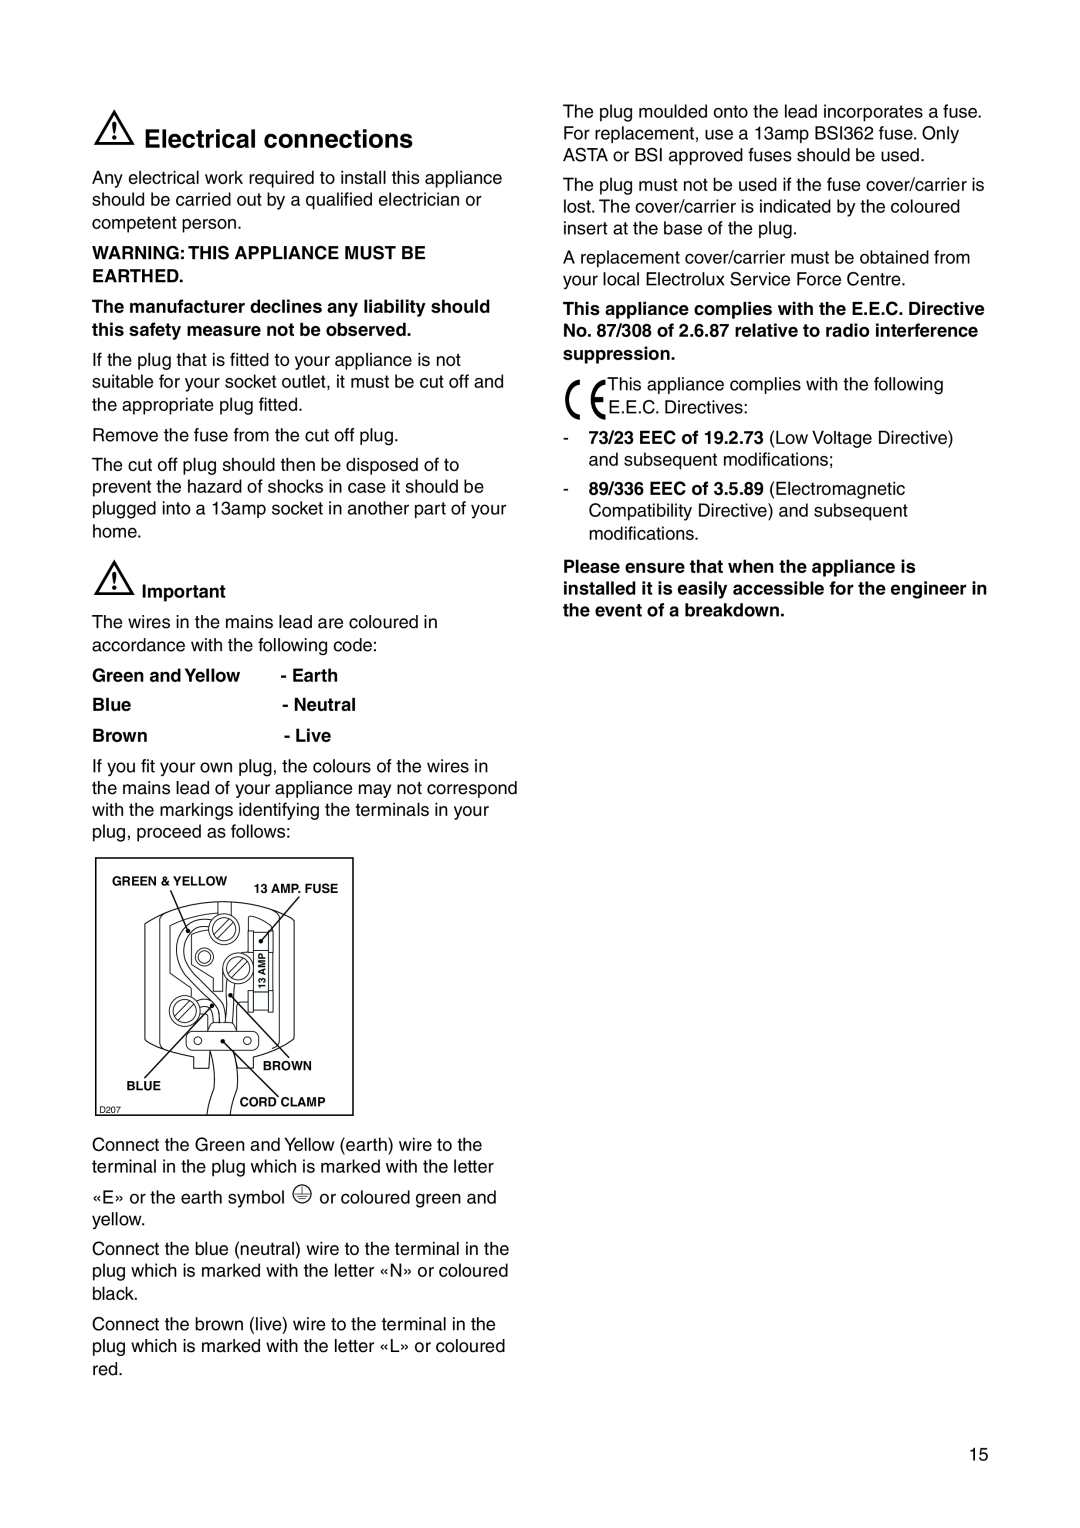 Electrolux 2223 208-81 user manual Electrical connections, Warning This Appliance Must Be Earthed, Green and Yellow 